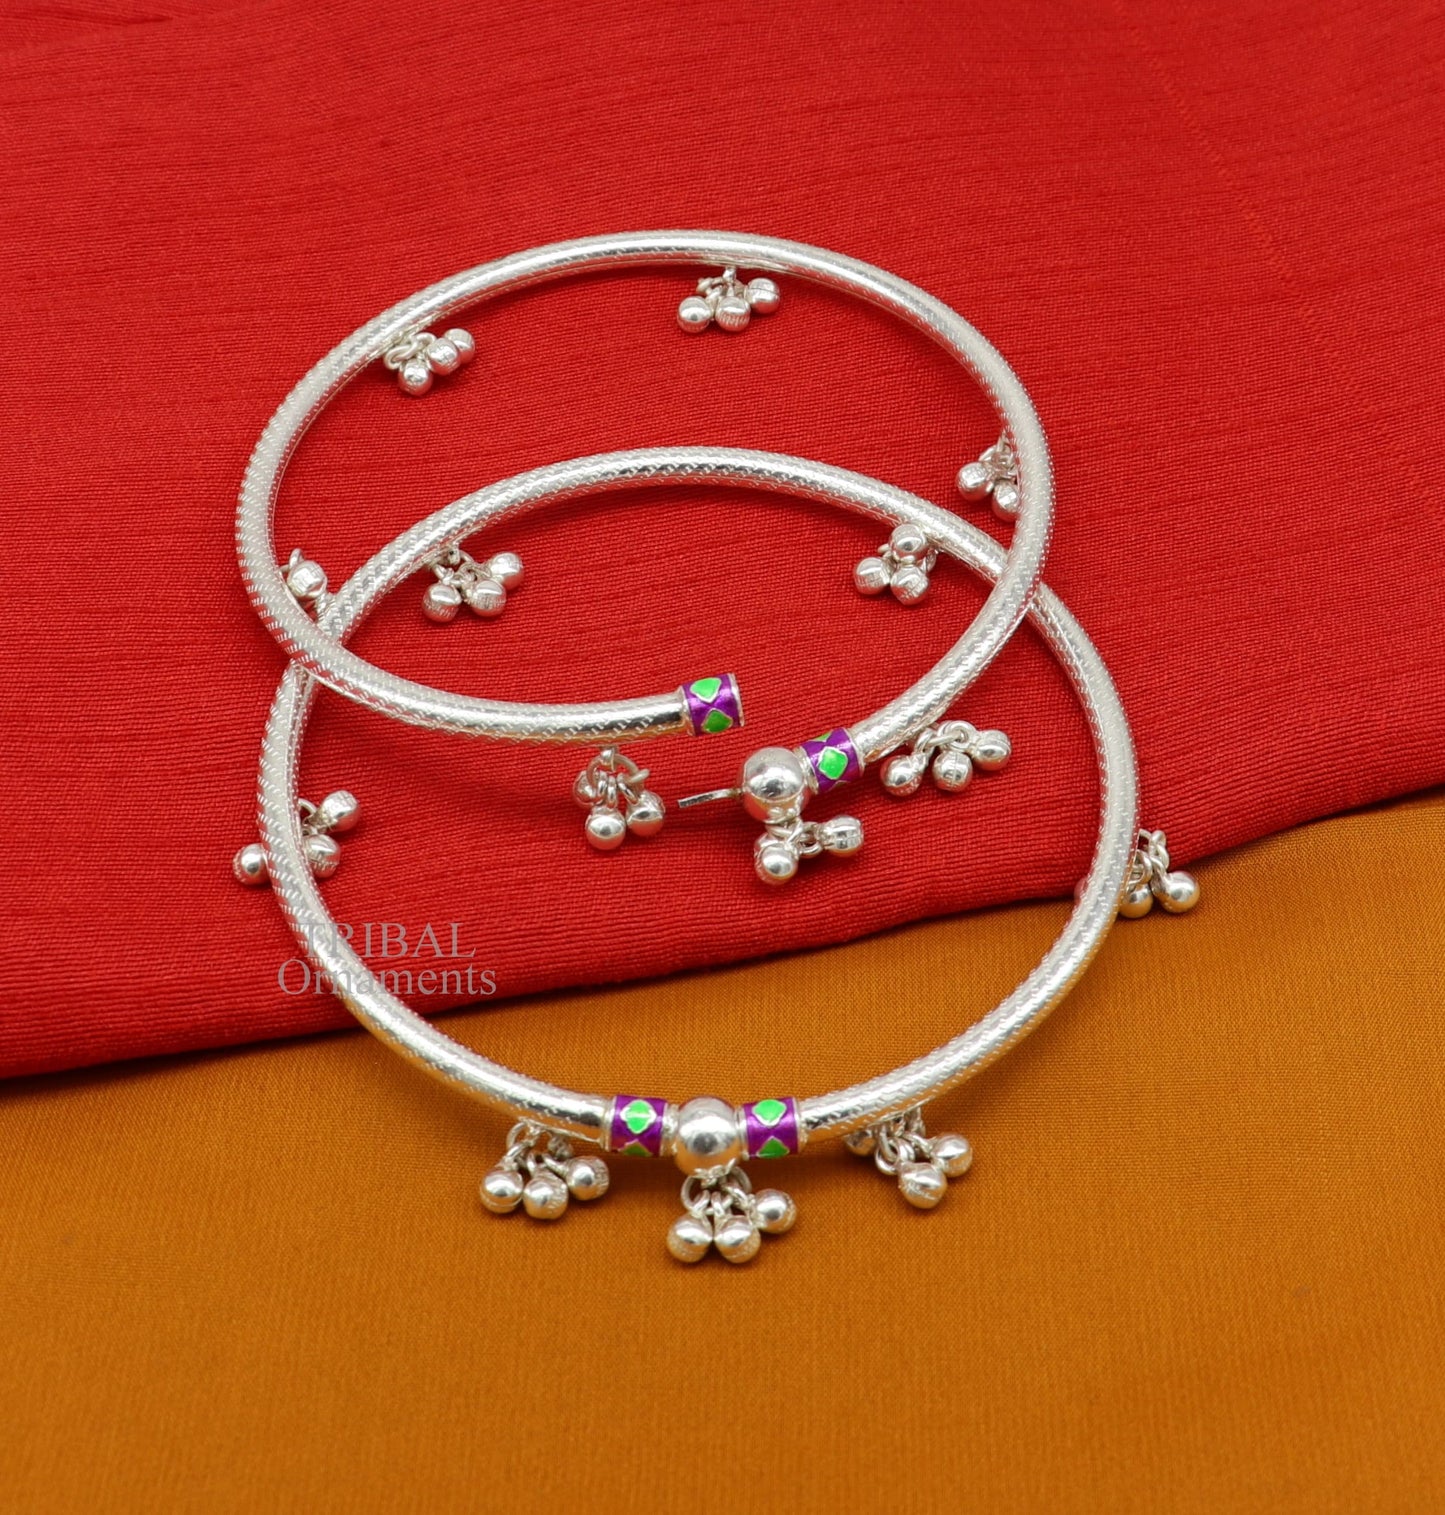 Sterling silver handmade gorgeous foot bangle bracelet kada, excellent jingling bells tribal customized anklet belly dance jewelry nsfk60 - TRIBAL ORNAMENTS